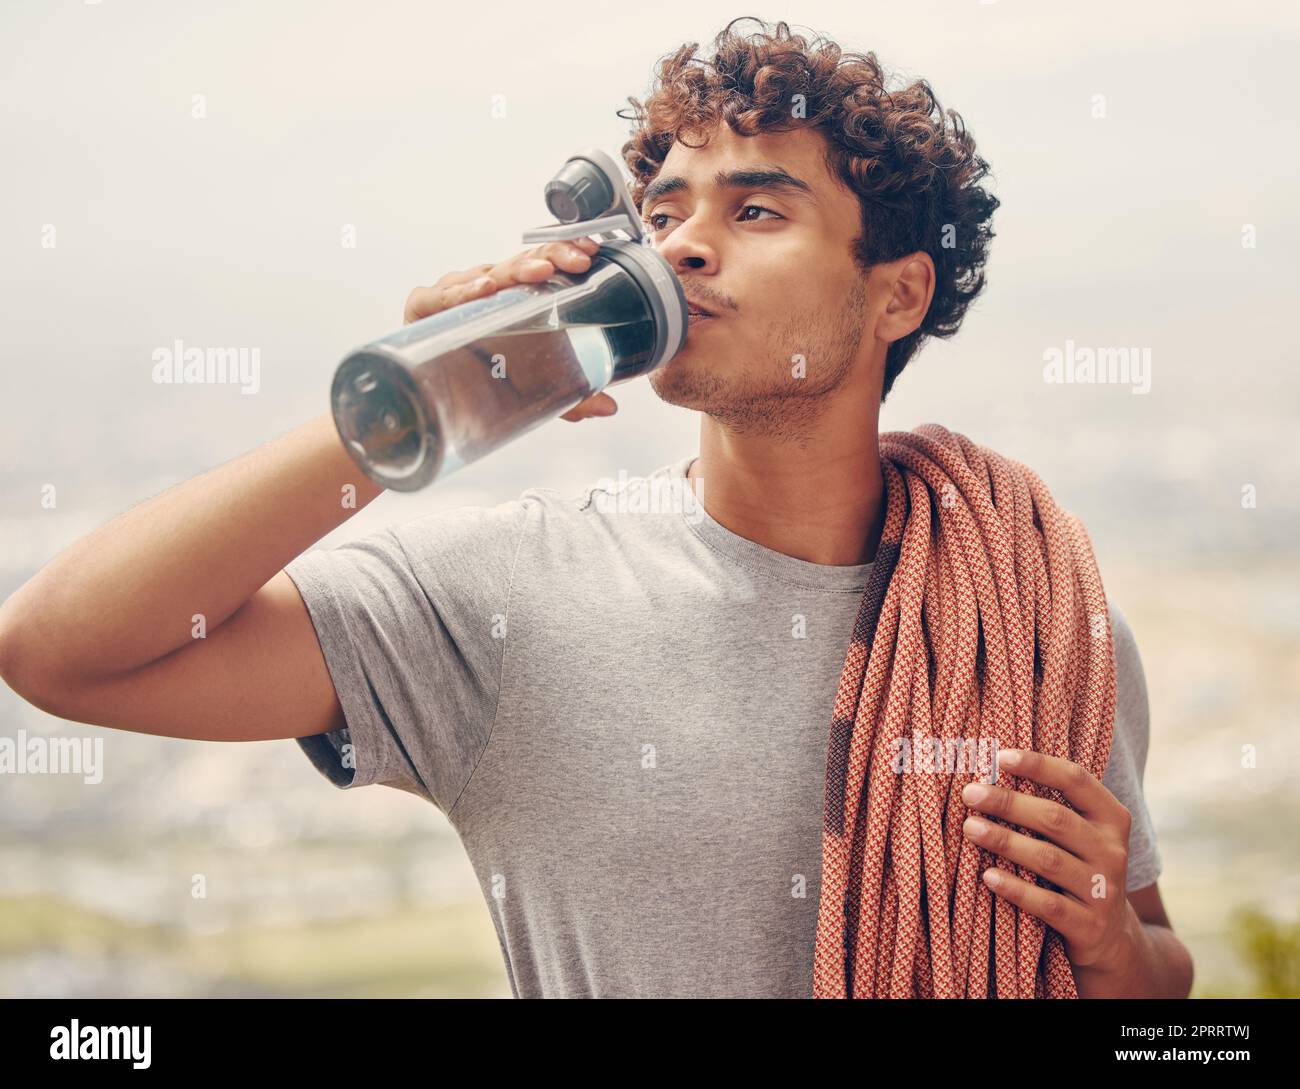 Sports man drinking water, hiking or rope rock mountain climbing adventure, workout or exercise outdoor. Wellness fitness and extreme sport climber with health, relax and refreshing liquid on break. Stock Photo